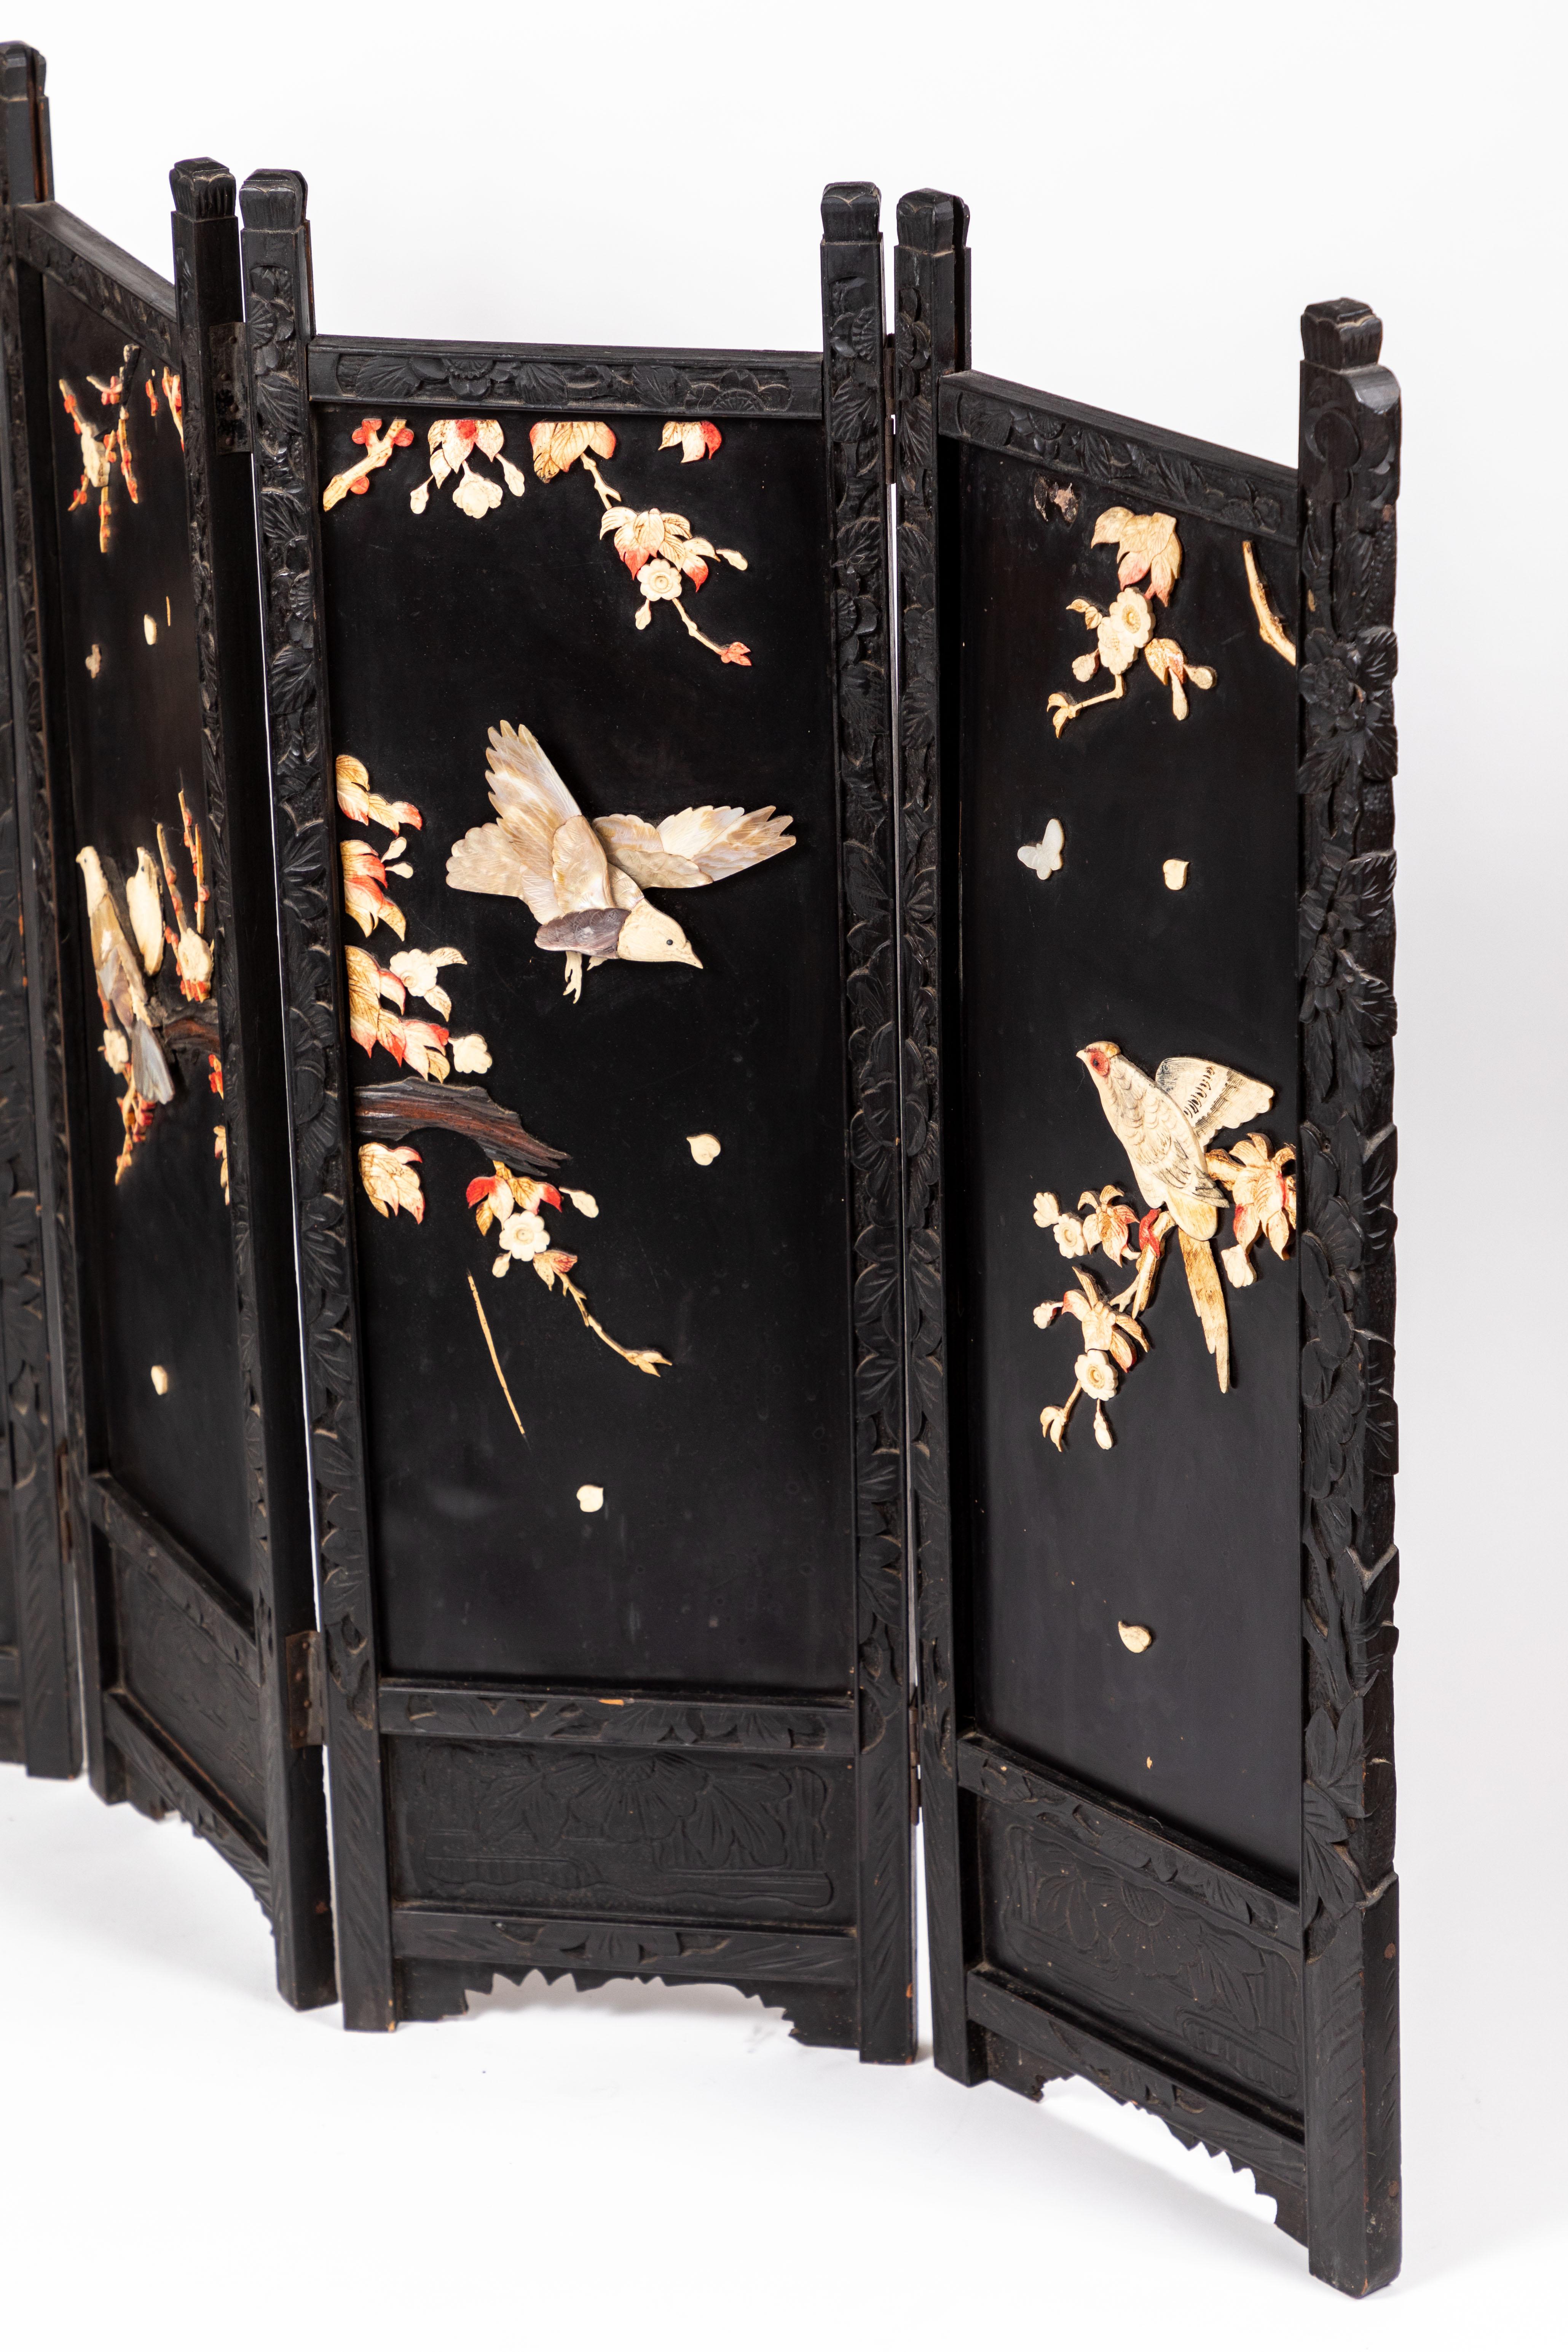 20th Century Antique Japanese Hand Carved, Black Lacquer Table Top 4-Panel Folding Screen For Sale